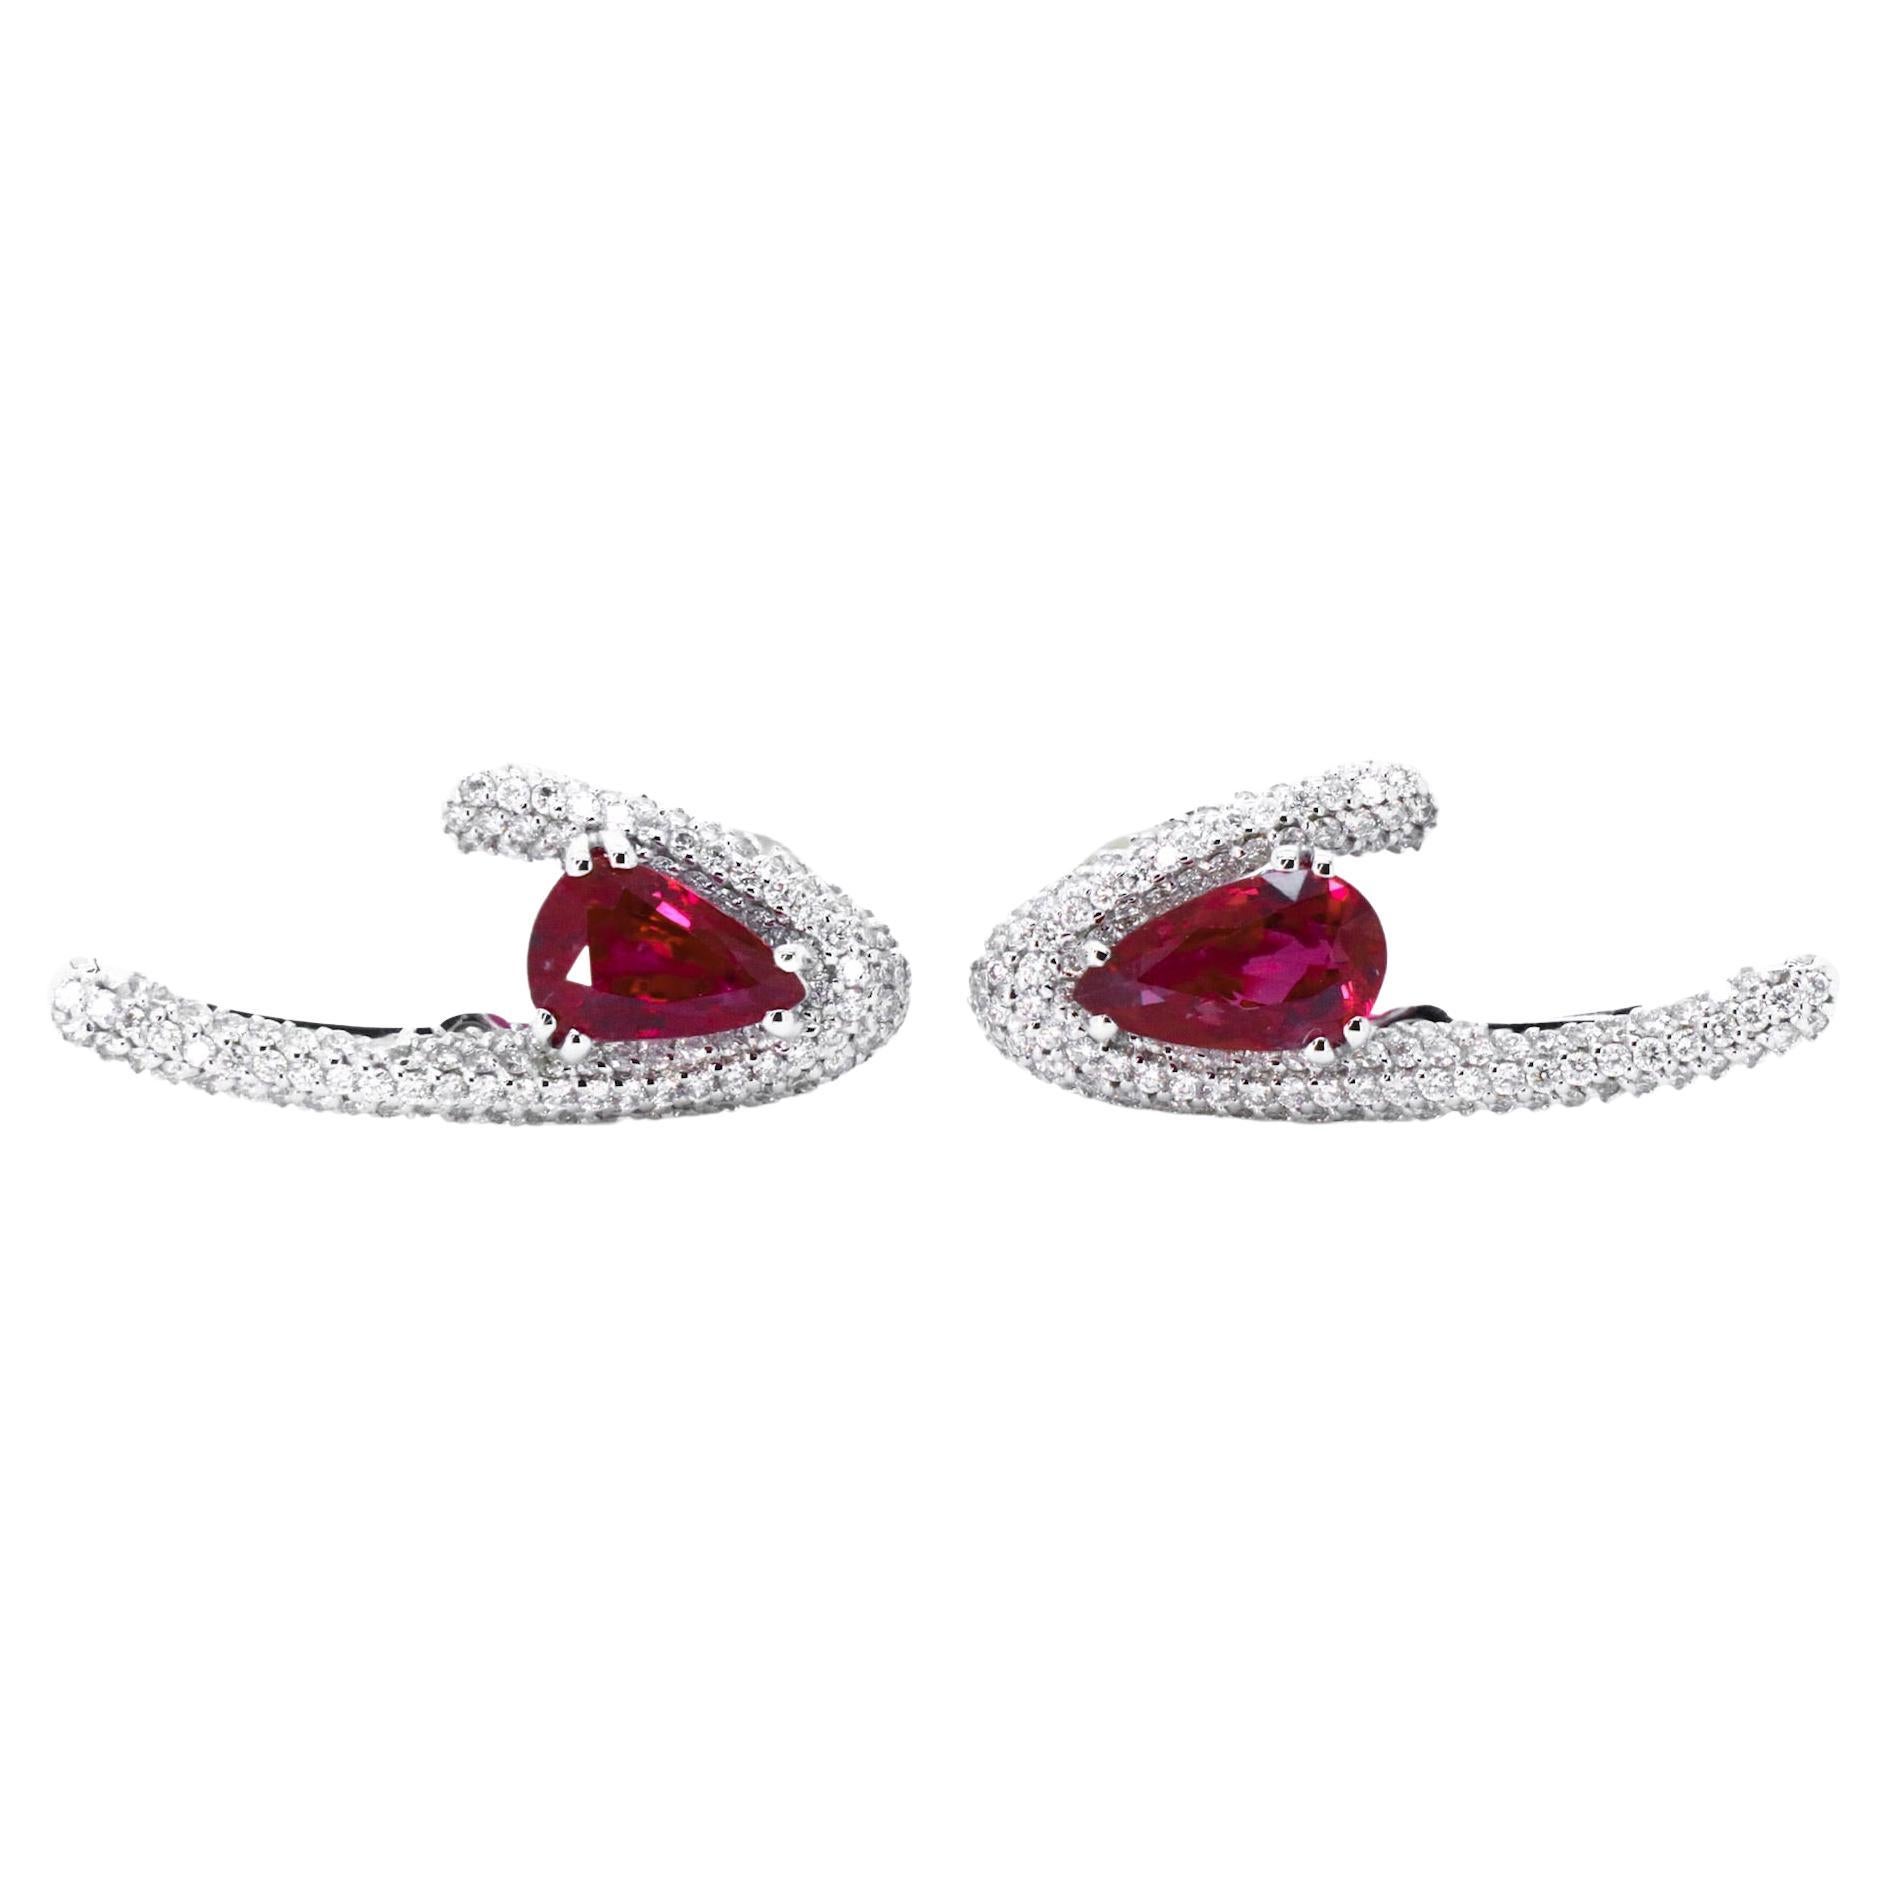 4 cts No Heat Ruby Diamond 18Kt Gold Innovative Clasp Empowering Bold Earrings.
Unlock Your Divine Potential with the Balance and Versatility of Gemini Earrings. 
Gems and metal are energetically cleansed to emit their best vibrations.
The Gemini